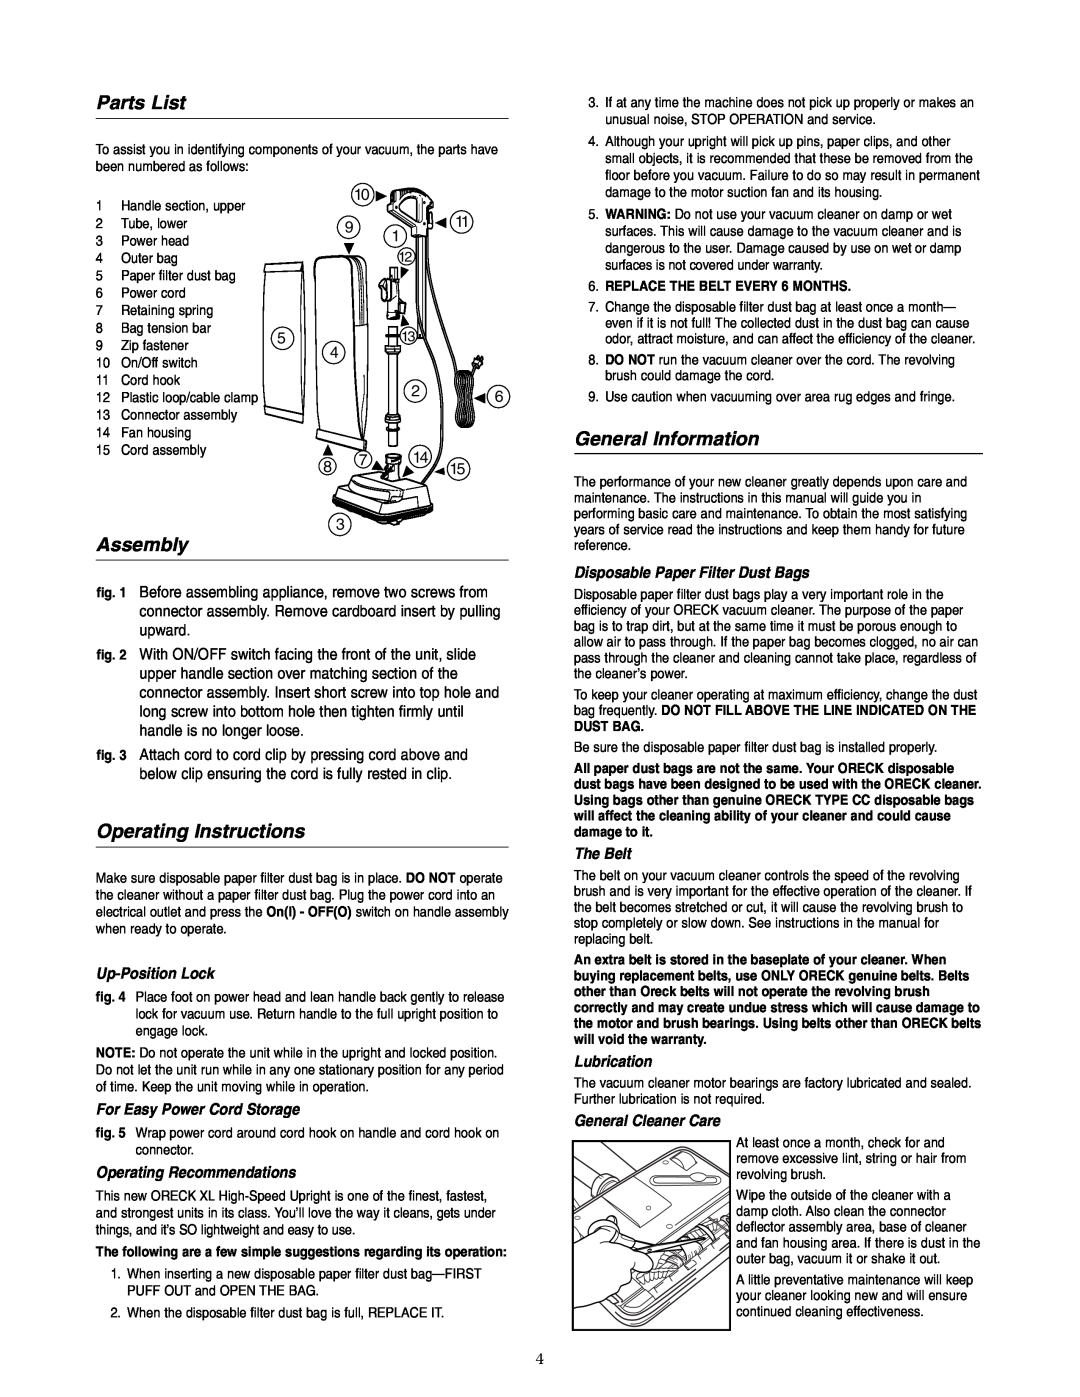 Oreck XL5-105HH Parts List, Assembly, Operating Instructions, General Information, Up-PositionLock, The Belt, Lubrication 